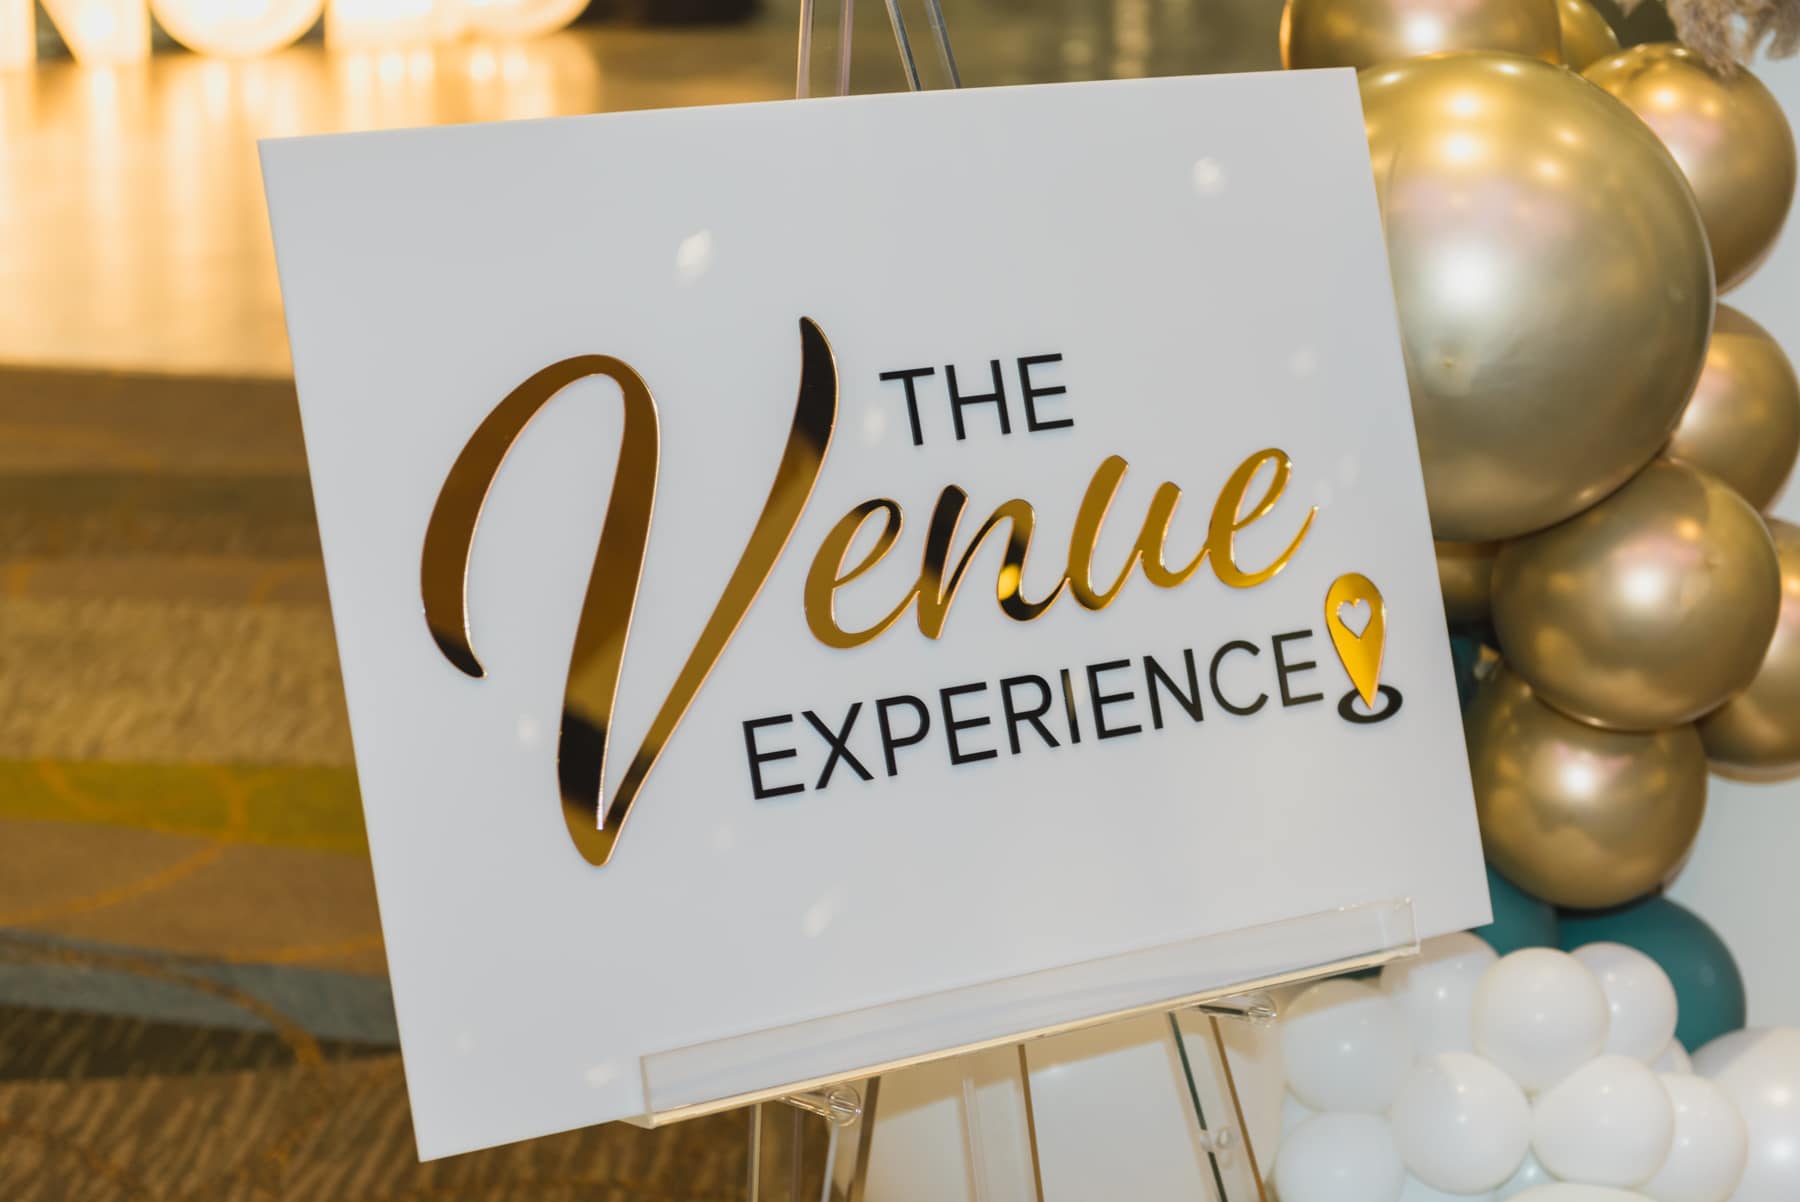 The Venue Experience display